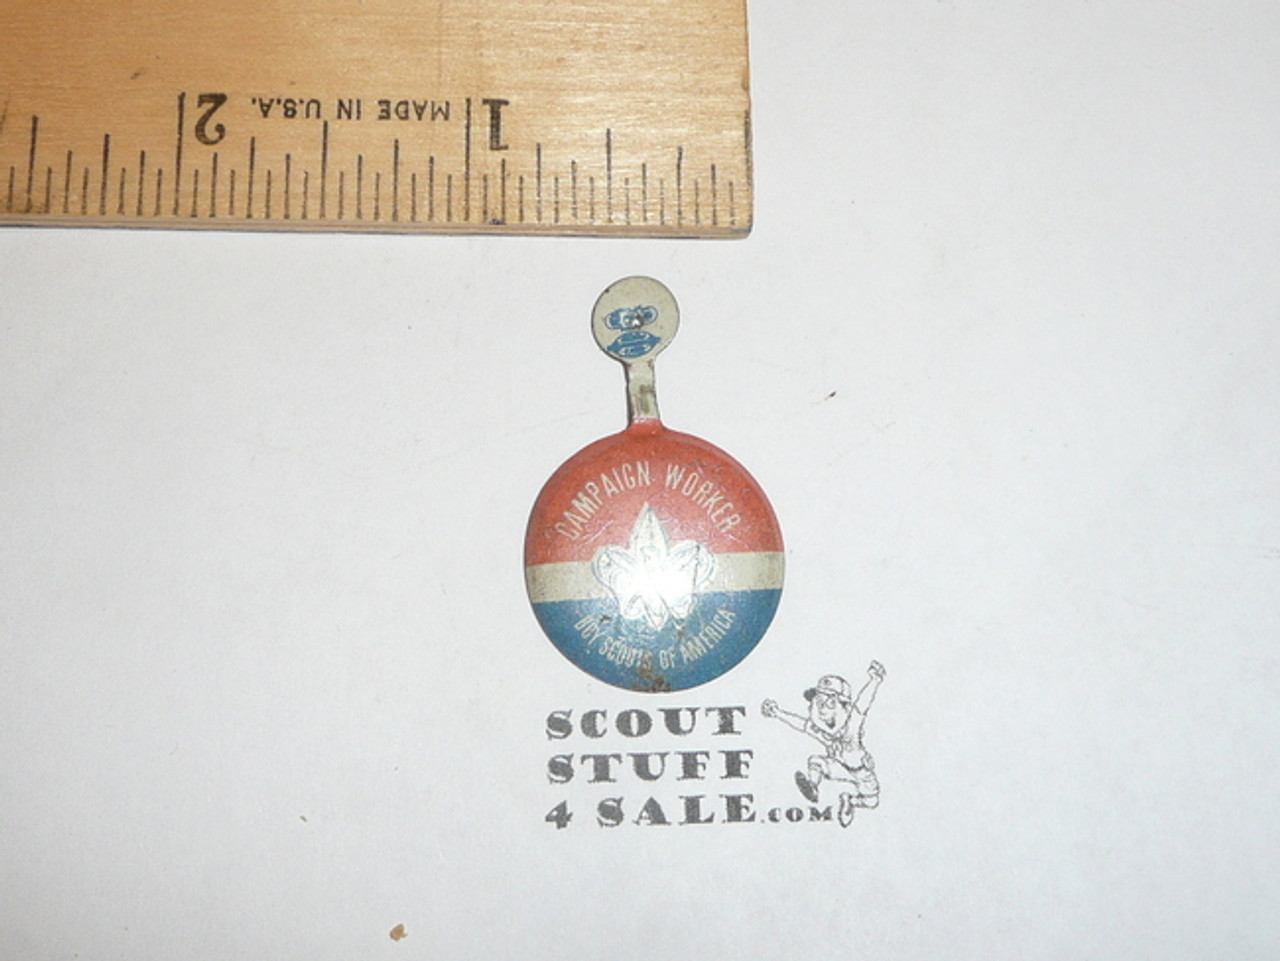 Campaign Worker Boy Scout Tin Button, 1950's-60's, some wear